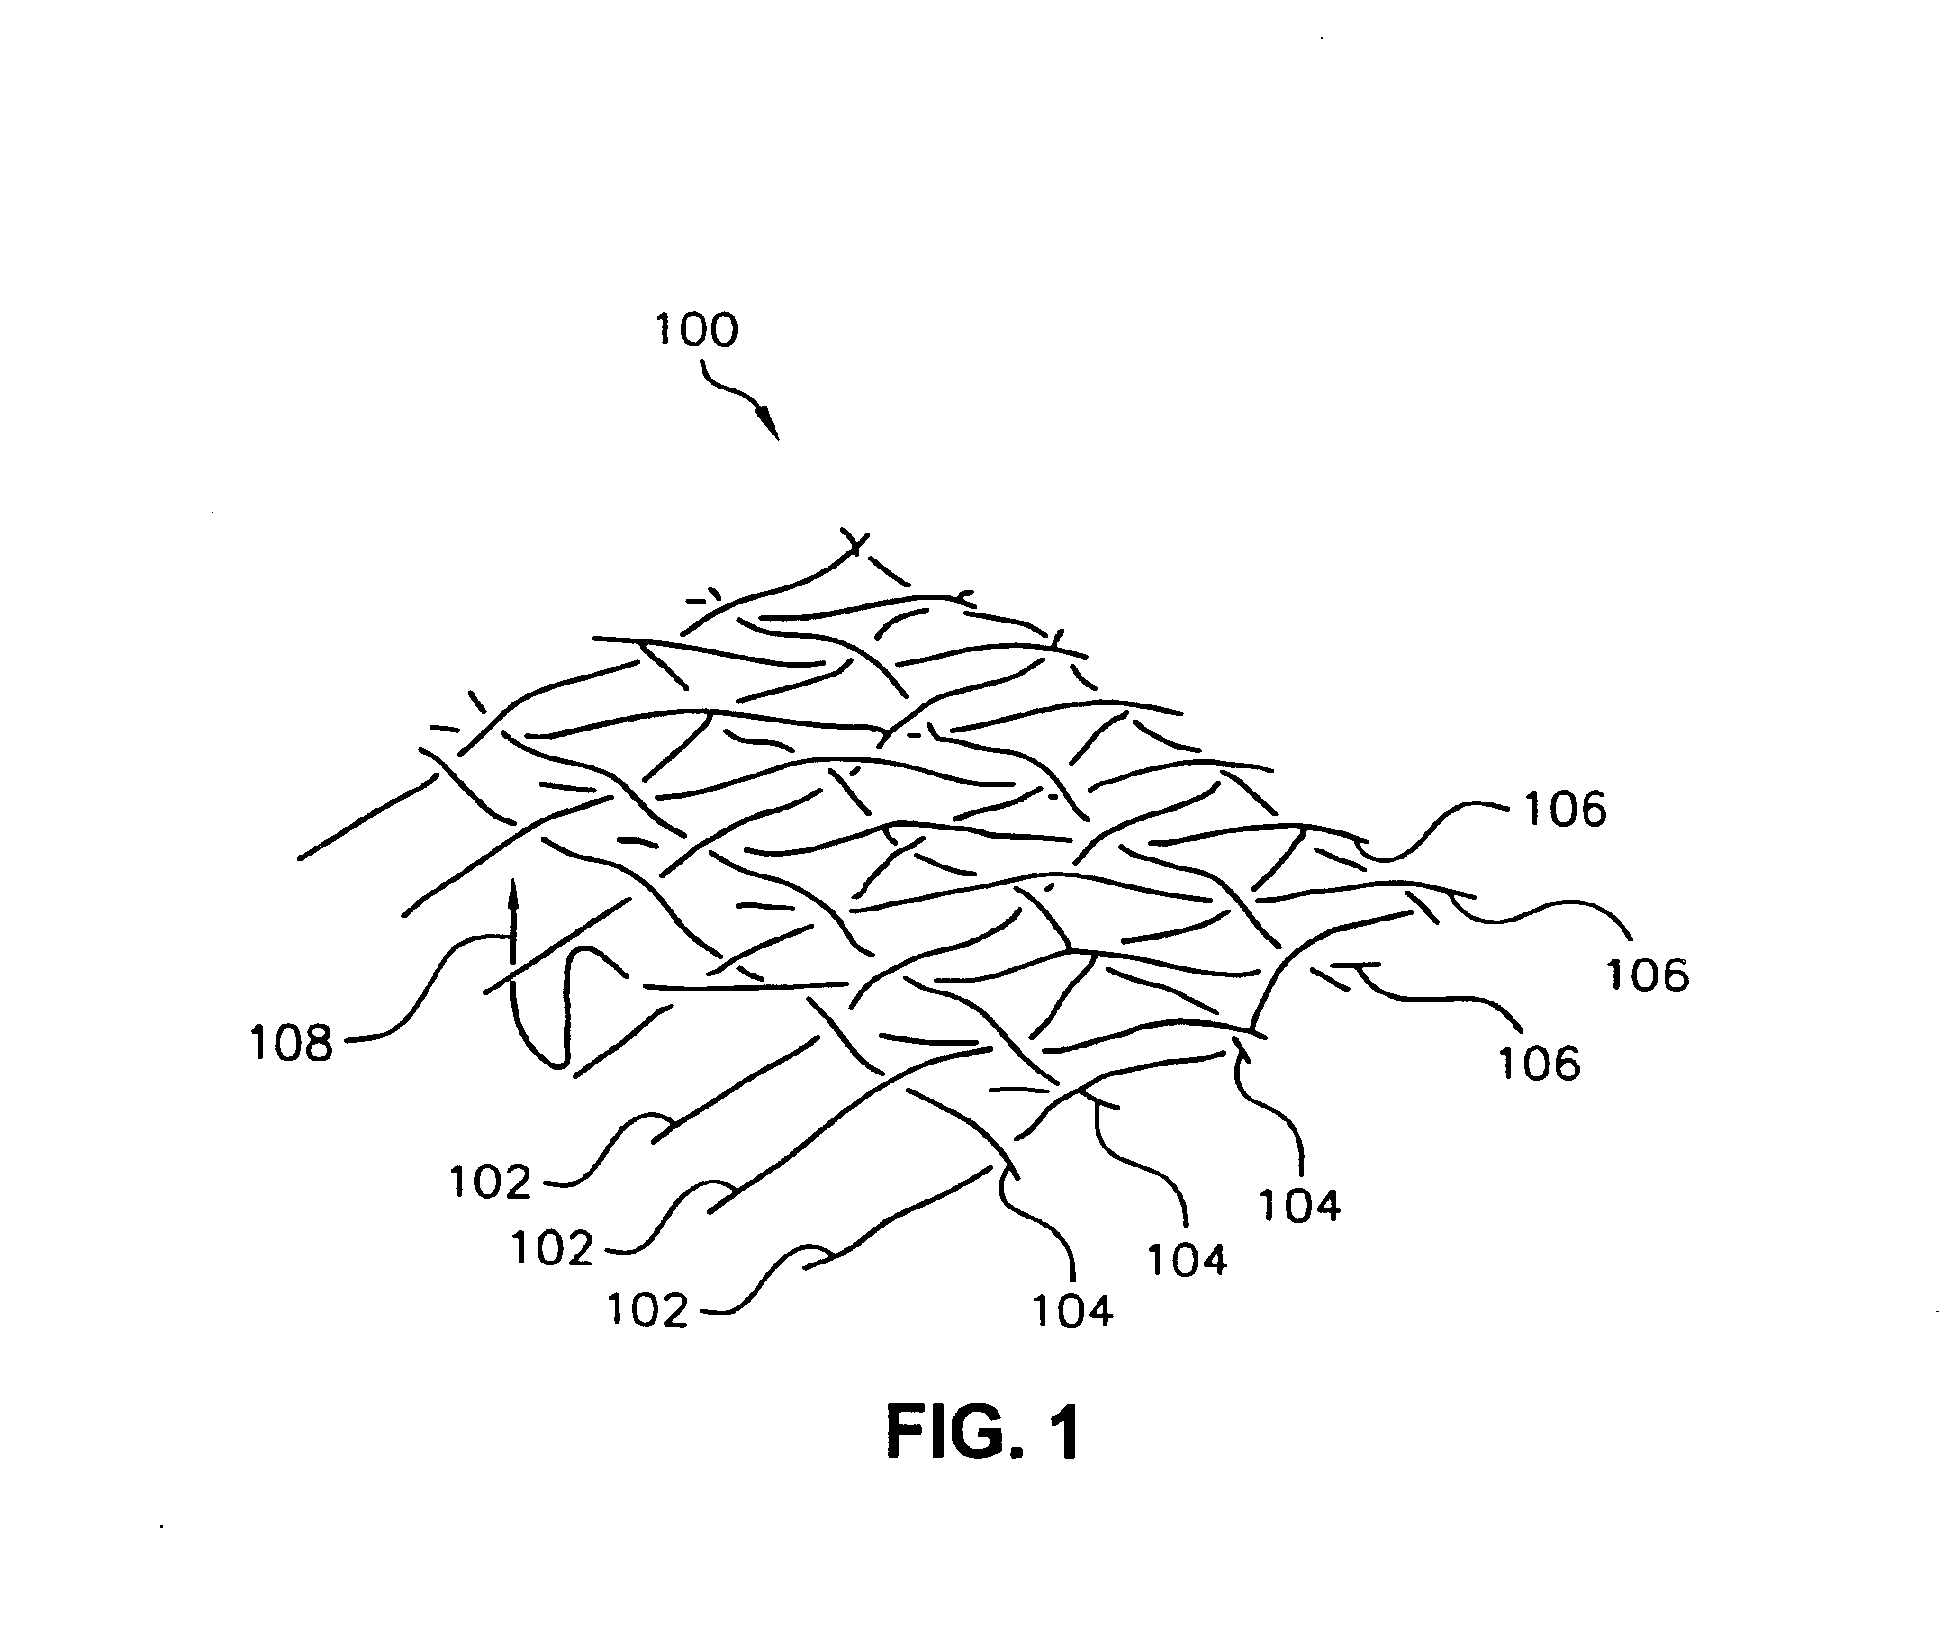 Loom and method of weaving three-dimensional woven forms with integral bias fibers